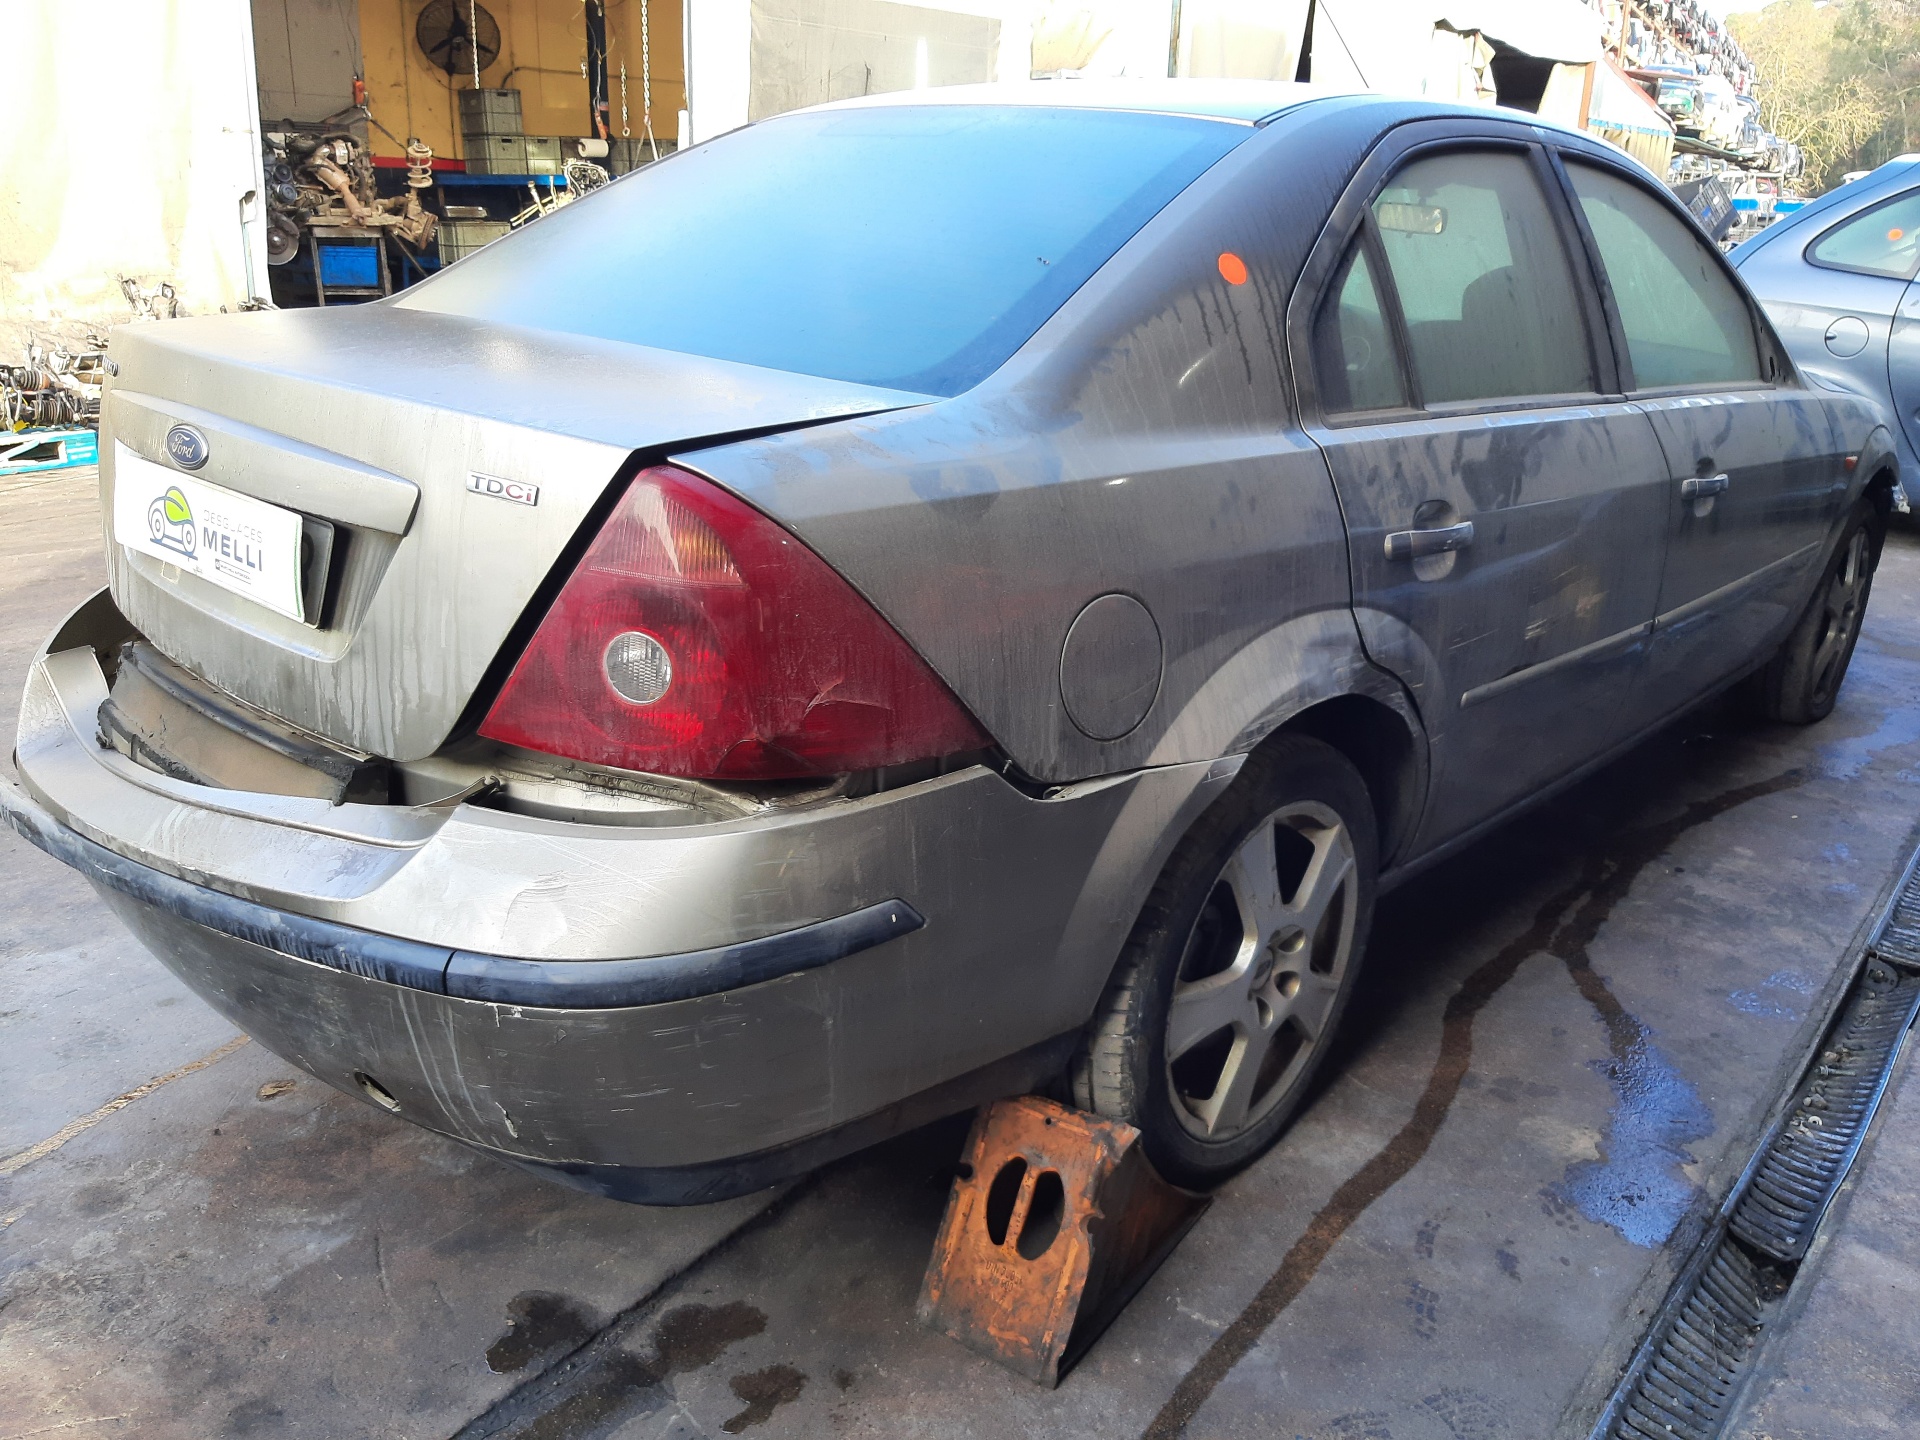 FORD Mondeo 3 generation (2000-2007) Other Control Units 1S7T15K600KD 23562483